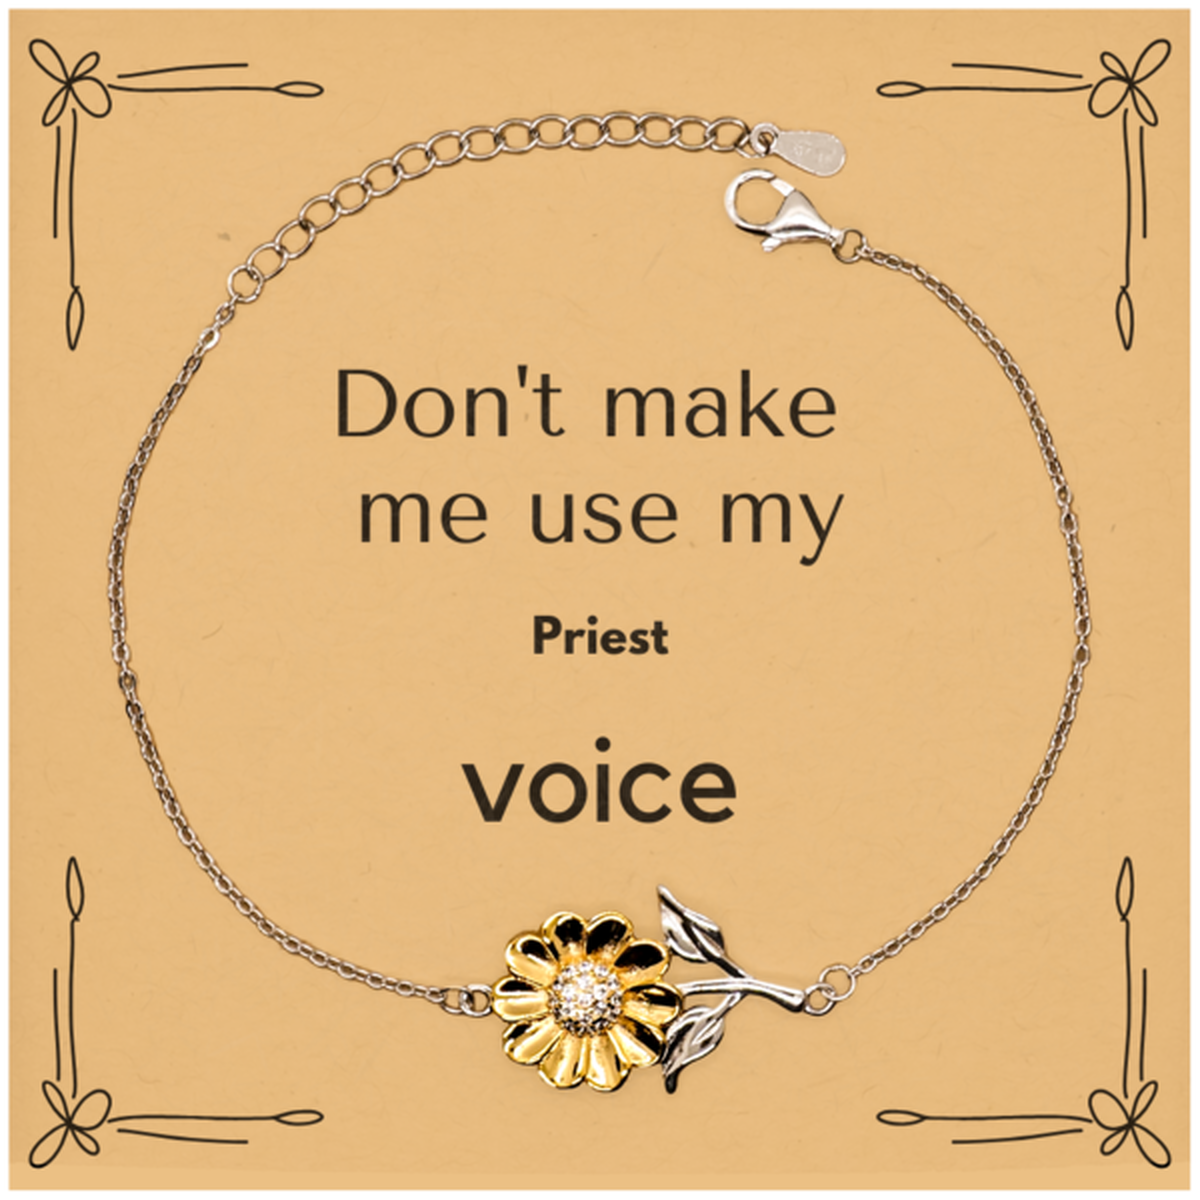 Don't make me use my Priest voice, Sarcasm Priest Card Gifts, Christmas Priest Sunflower Bracelet Birthday Unique Gifts For Priest Coworkers, Men, Women, Colleague, Friends